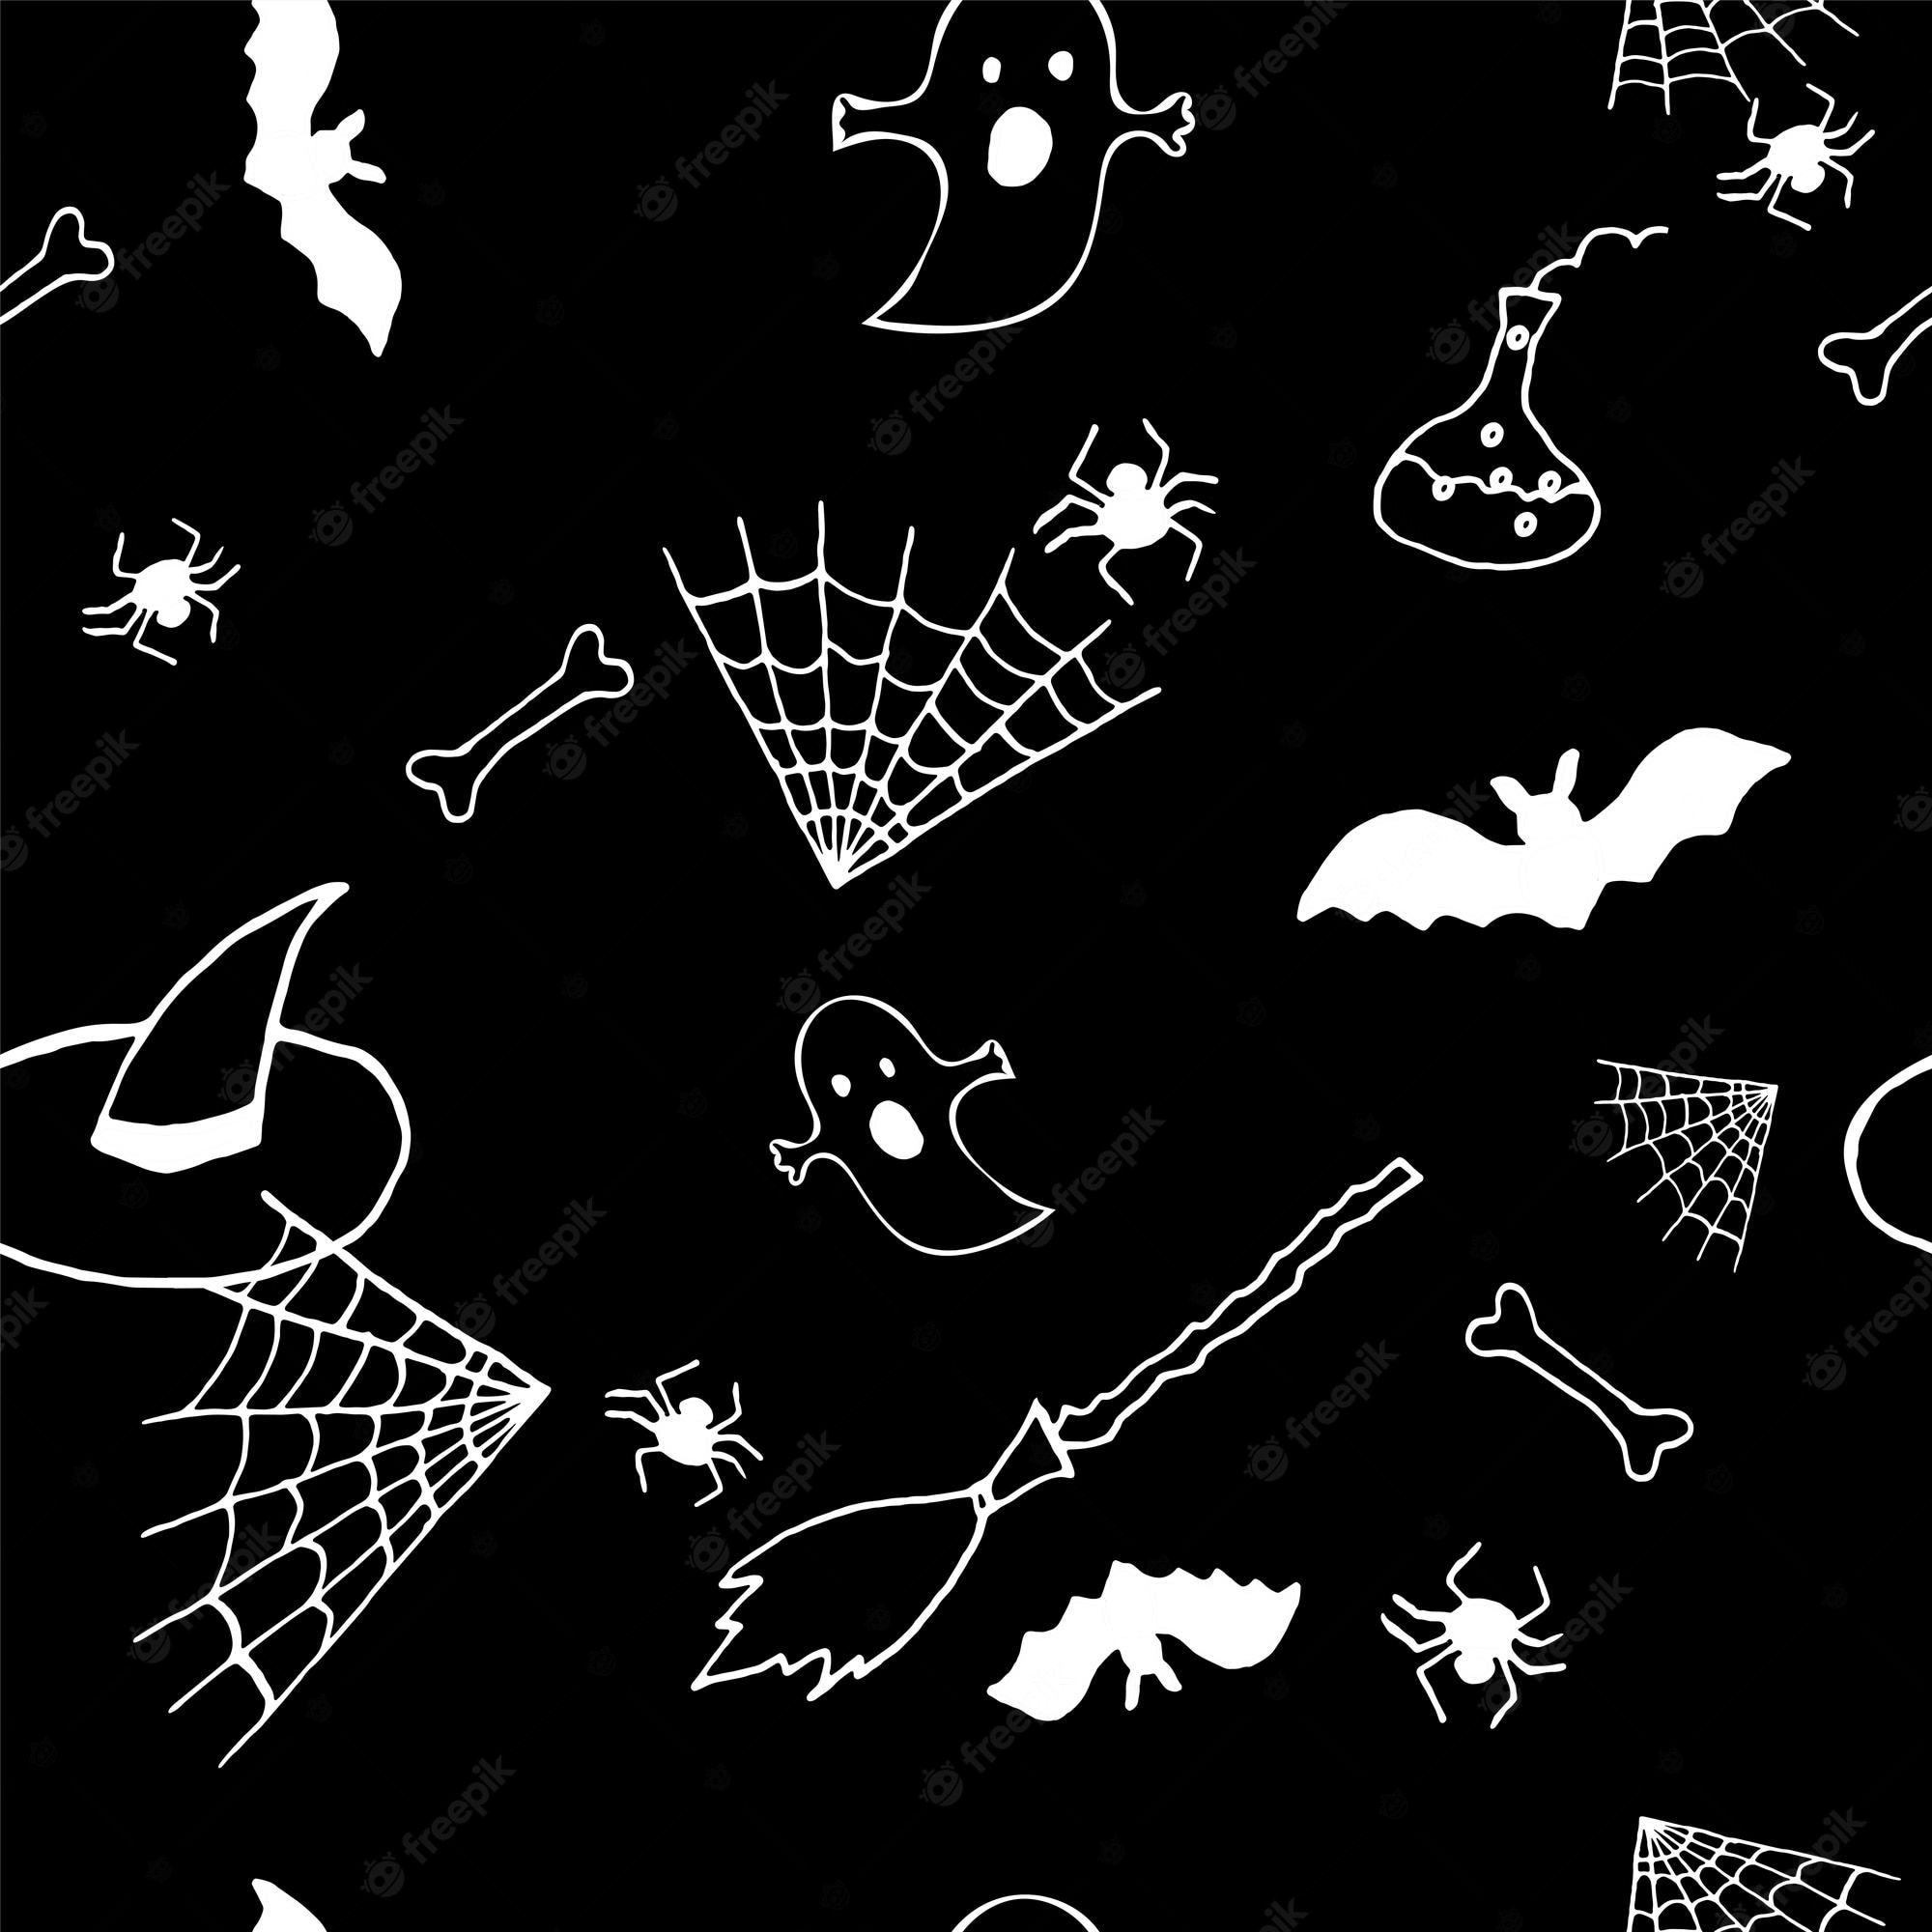 Witchy wallpaper Vectors & Illustrations for Free Download